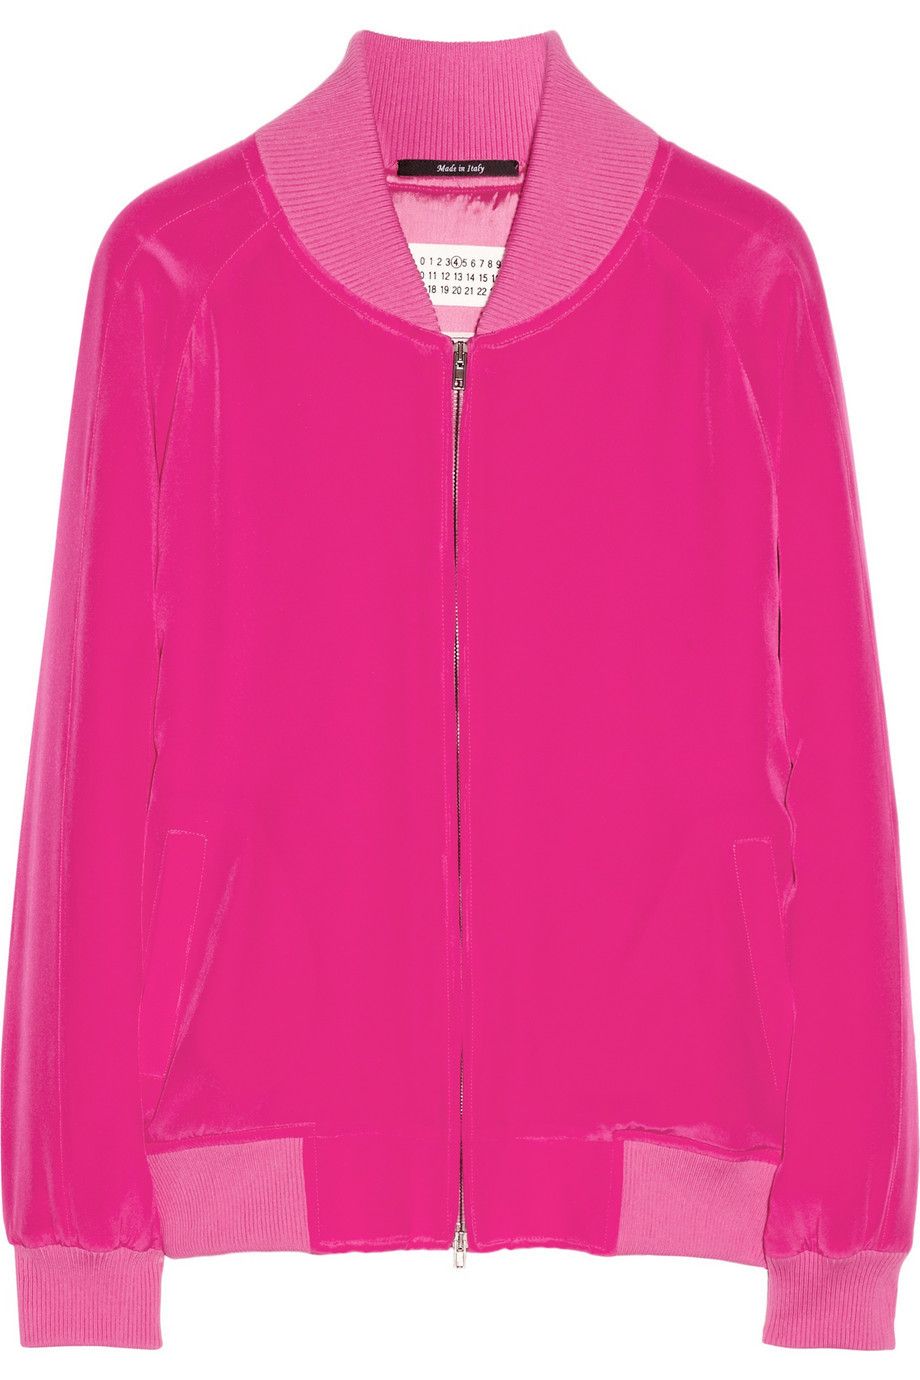 Product, Sleeve, Collar, Textile, Magenta, Red, Outerwear, White, Pink, Jacket, 